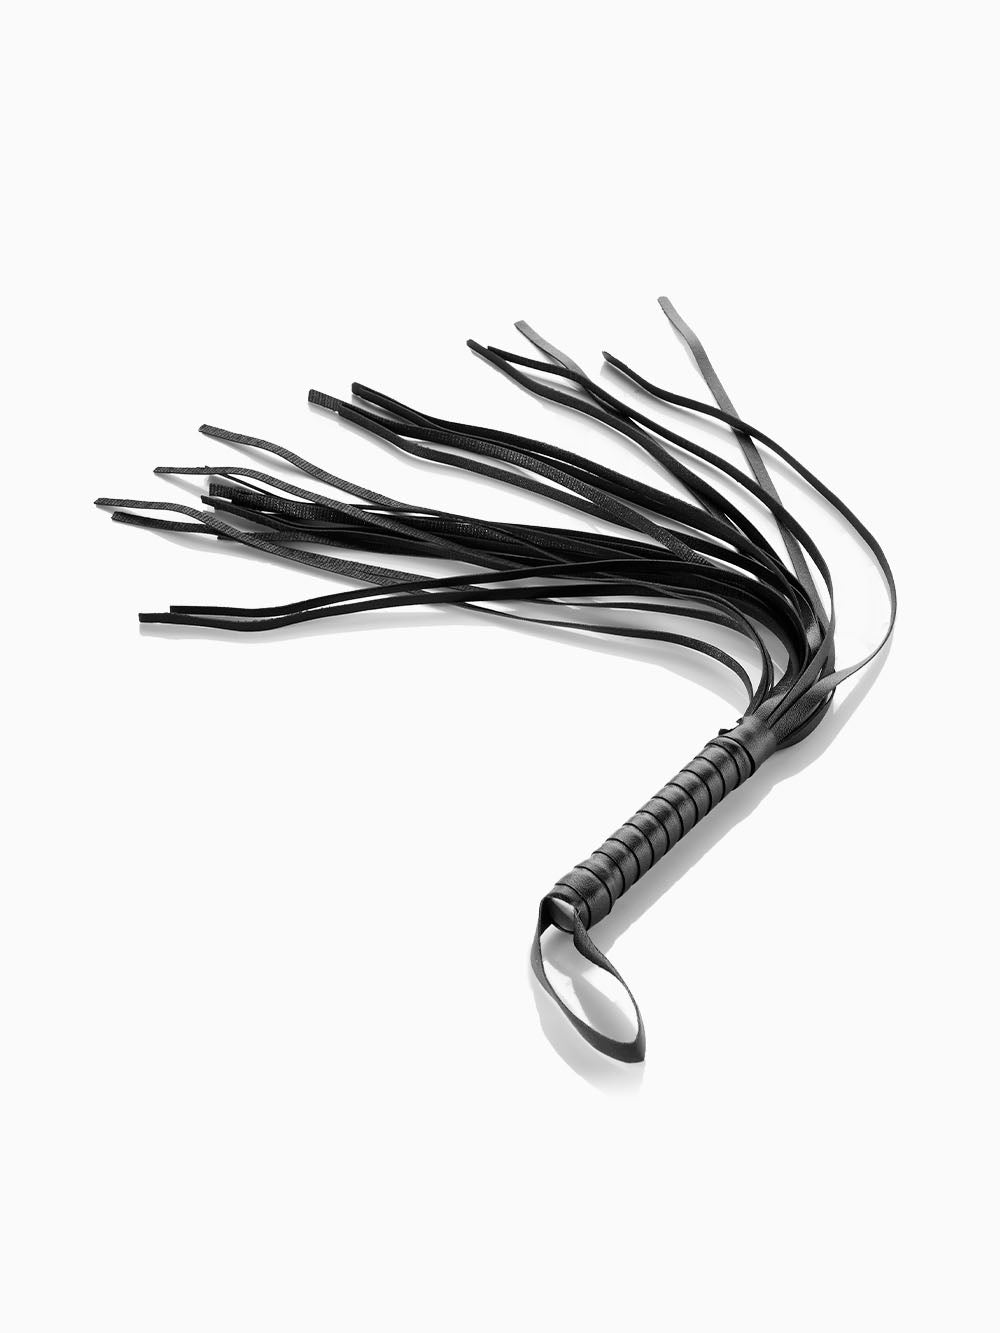 Pillow Talk Faux Leather Flogger Whip